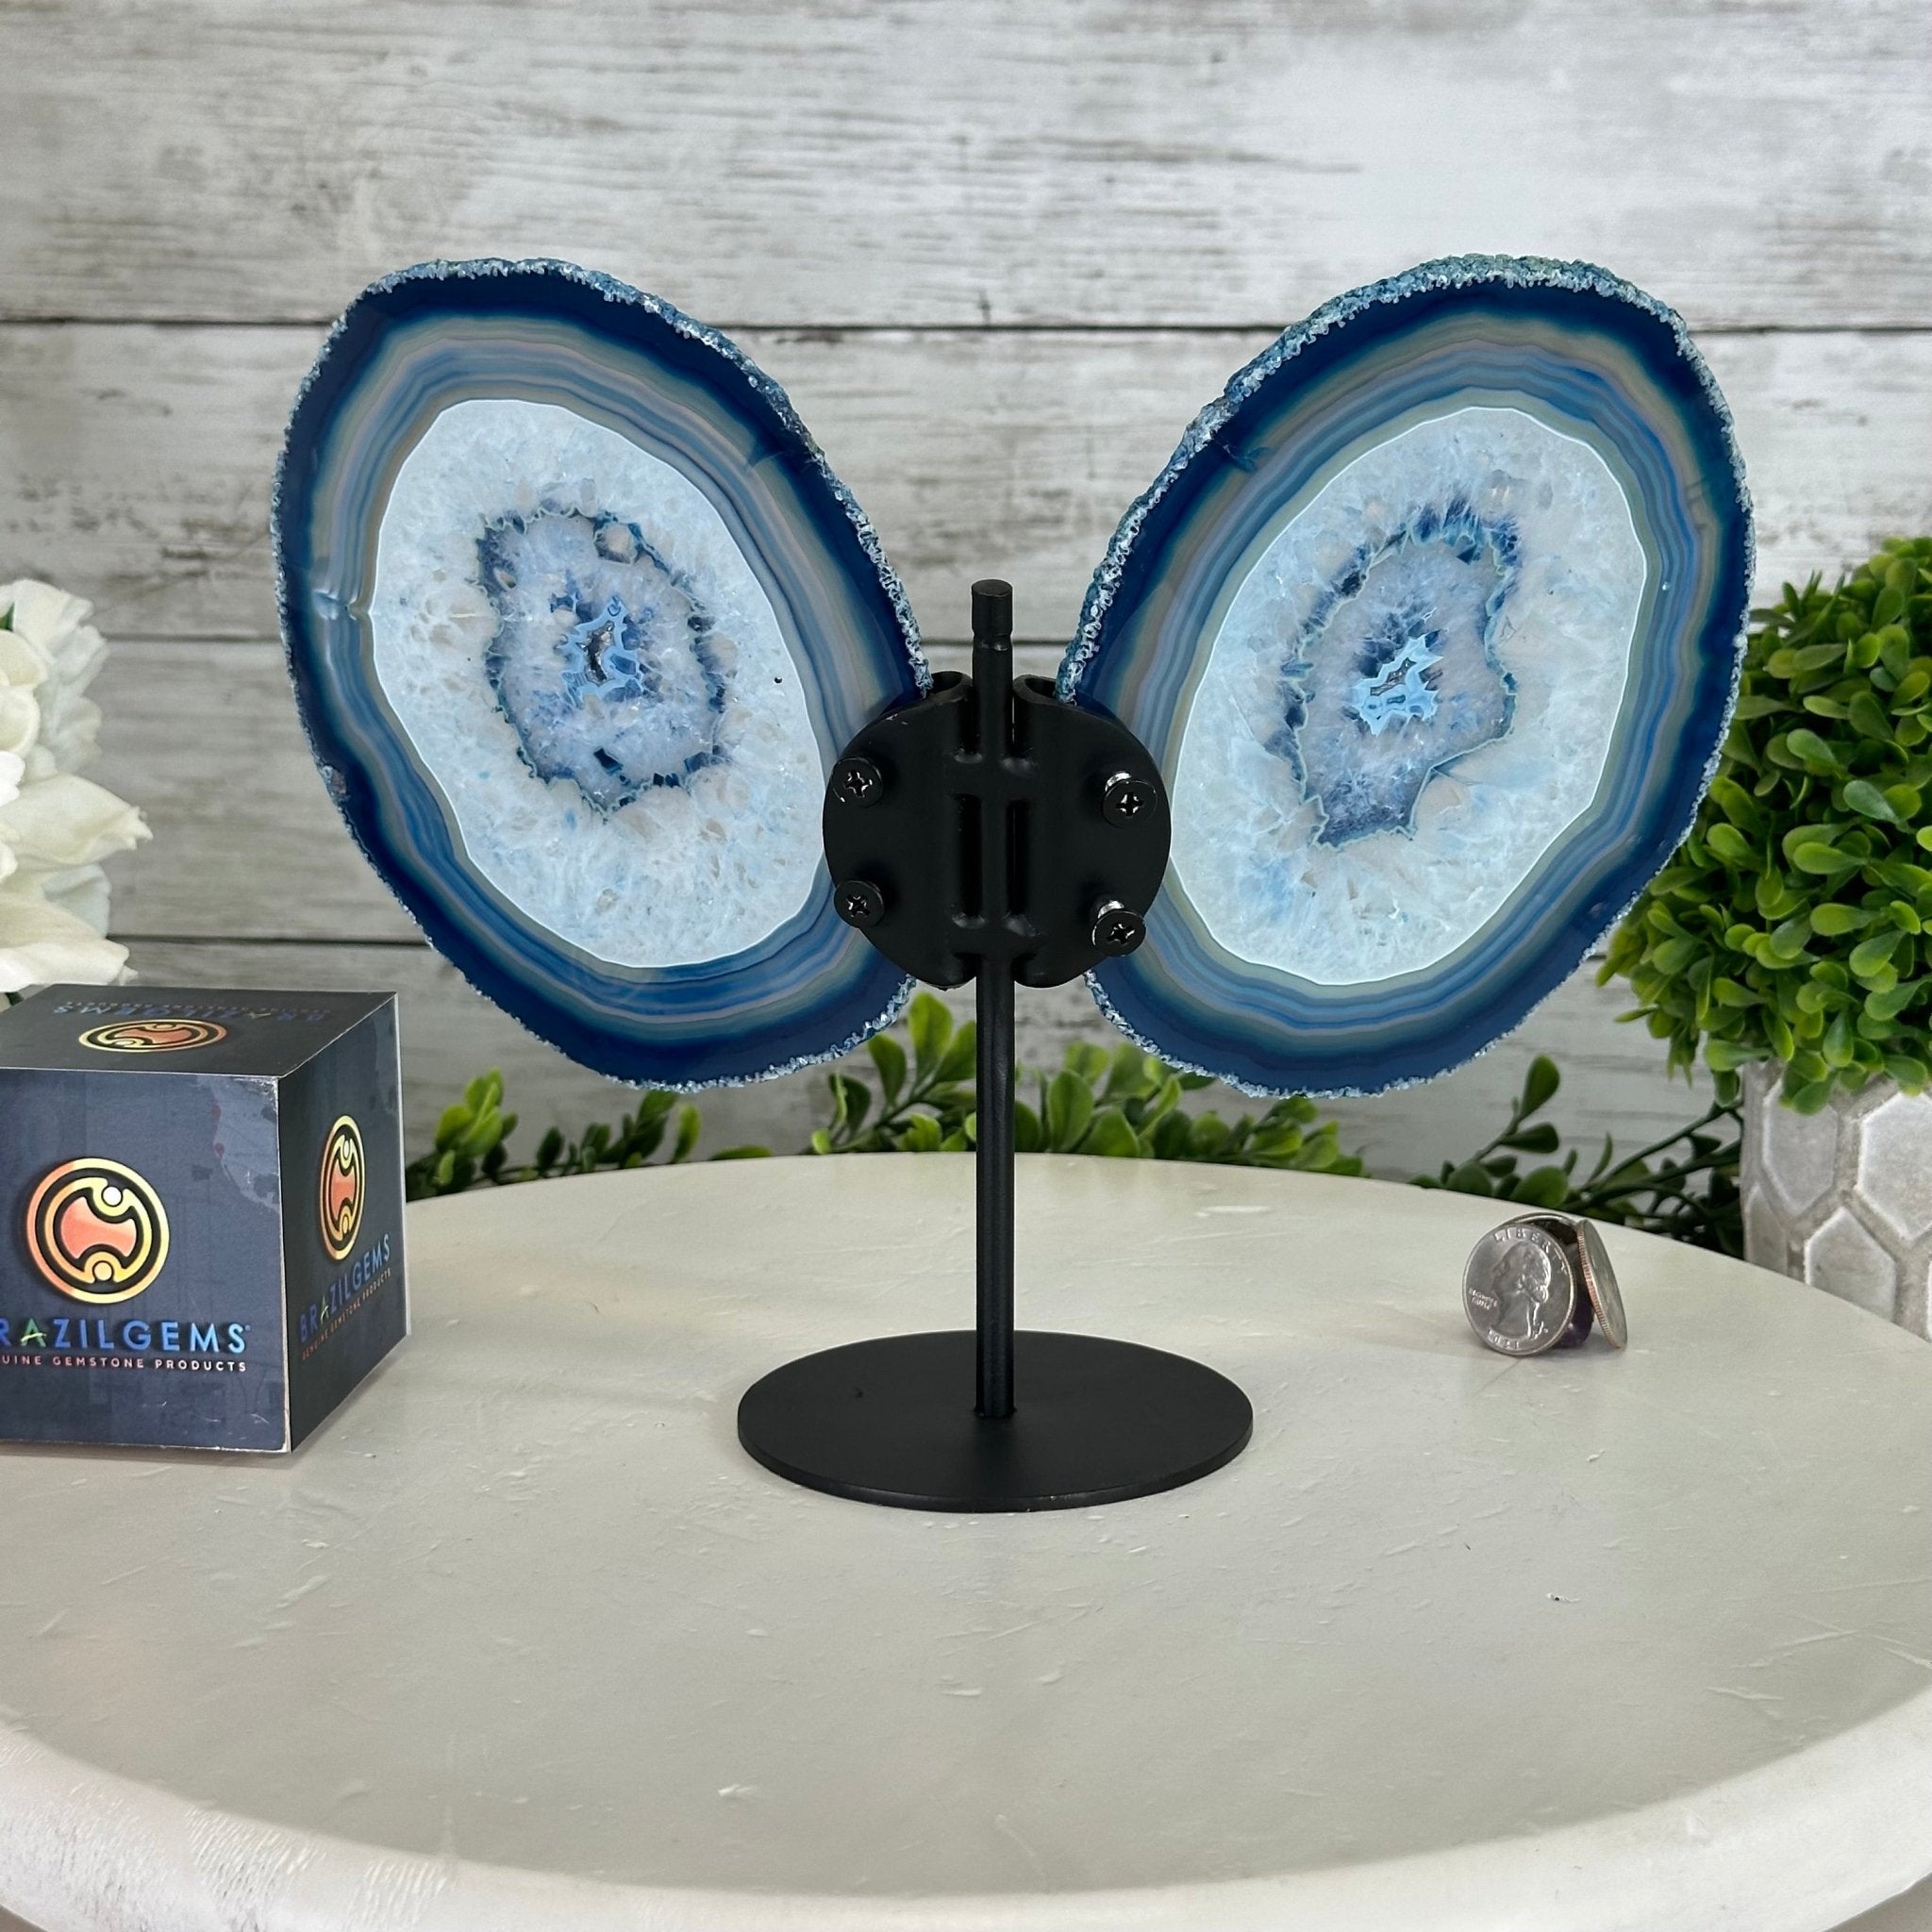 Blue Agate "Butterfly Wings" on stand, 7.5" Tall #5050BL-069 - Brazil GemsBrazil GemsBlue Agate "Butterfly Wings" on stand, 7.5" Tall #5050BL-069Agate Butterfly Wings5050BL-069